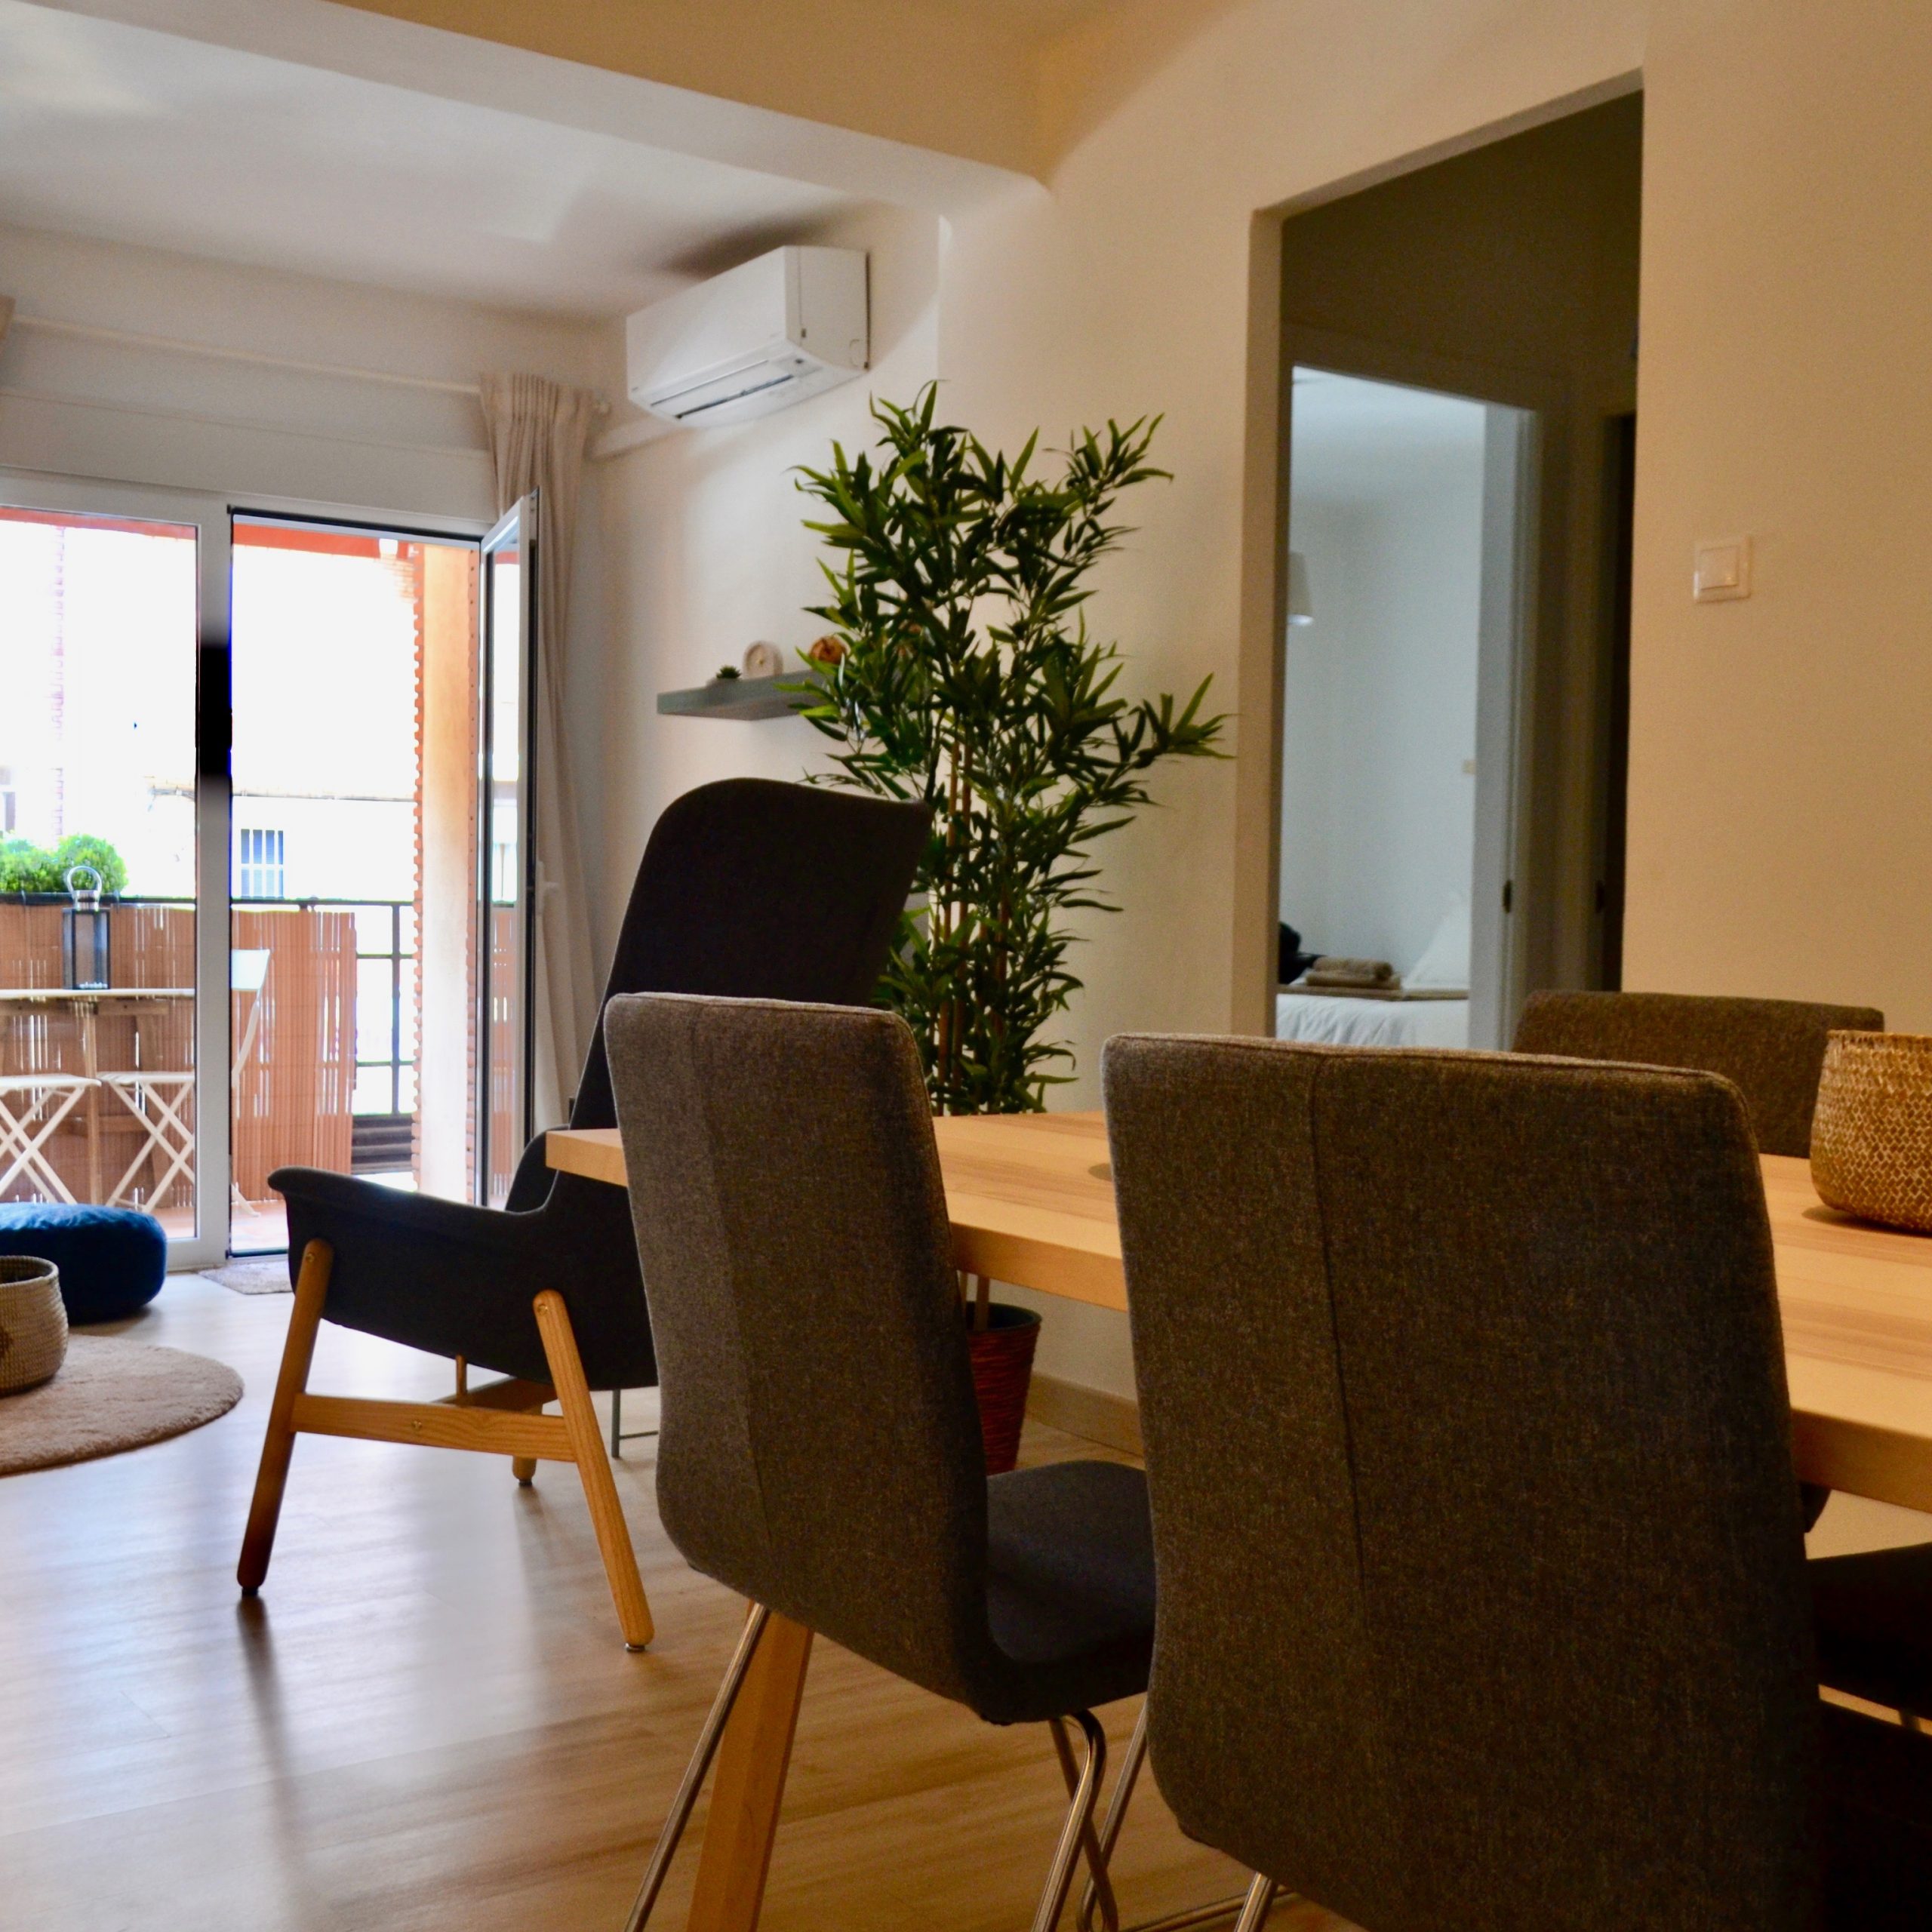 Accommodation for expats in Valencia